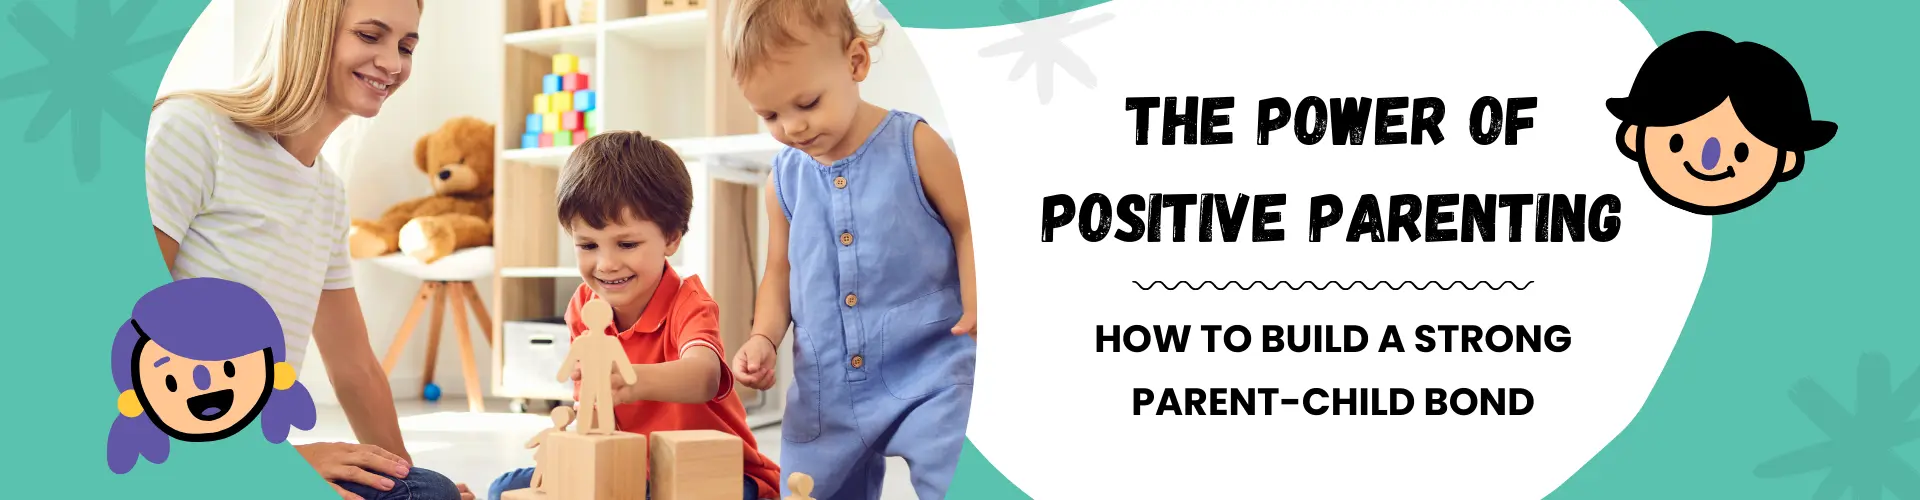 The Power of Positive Parenting